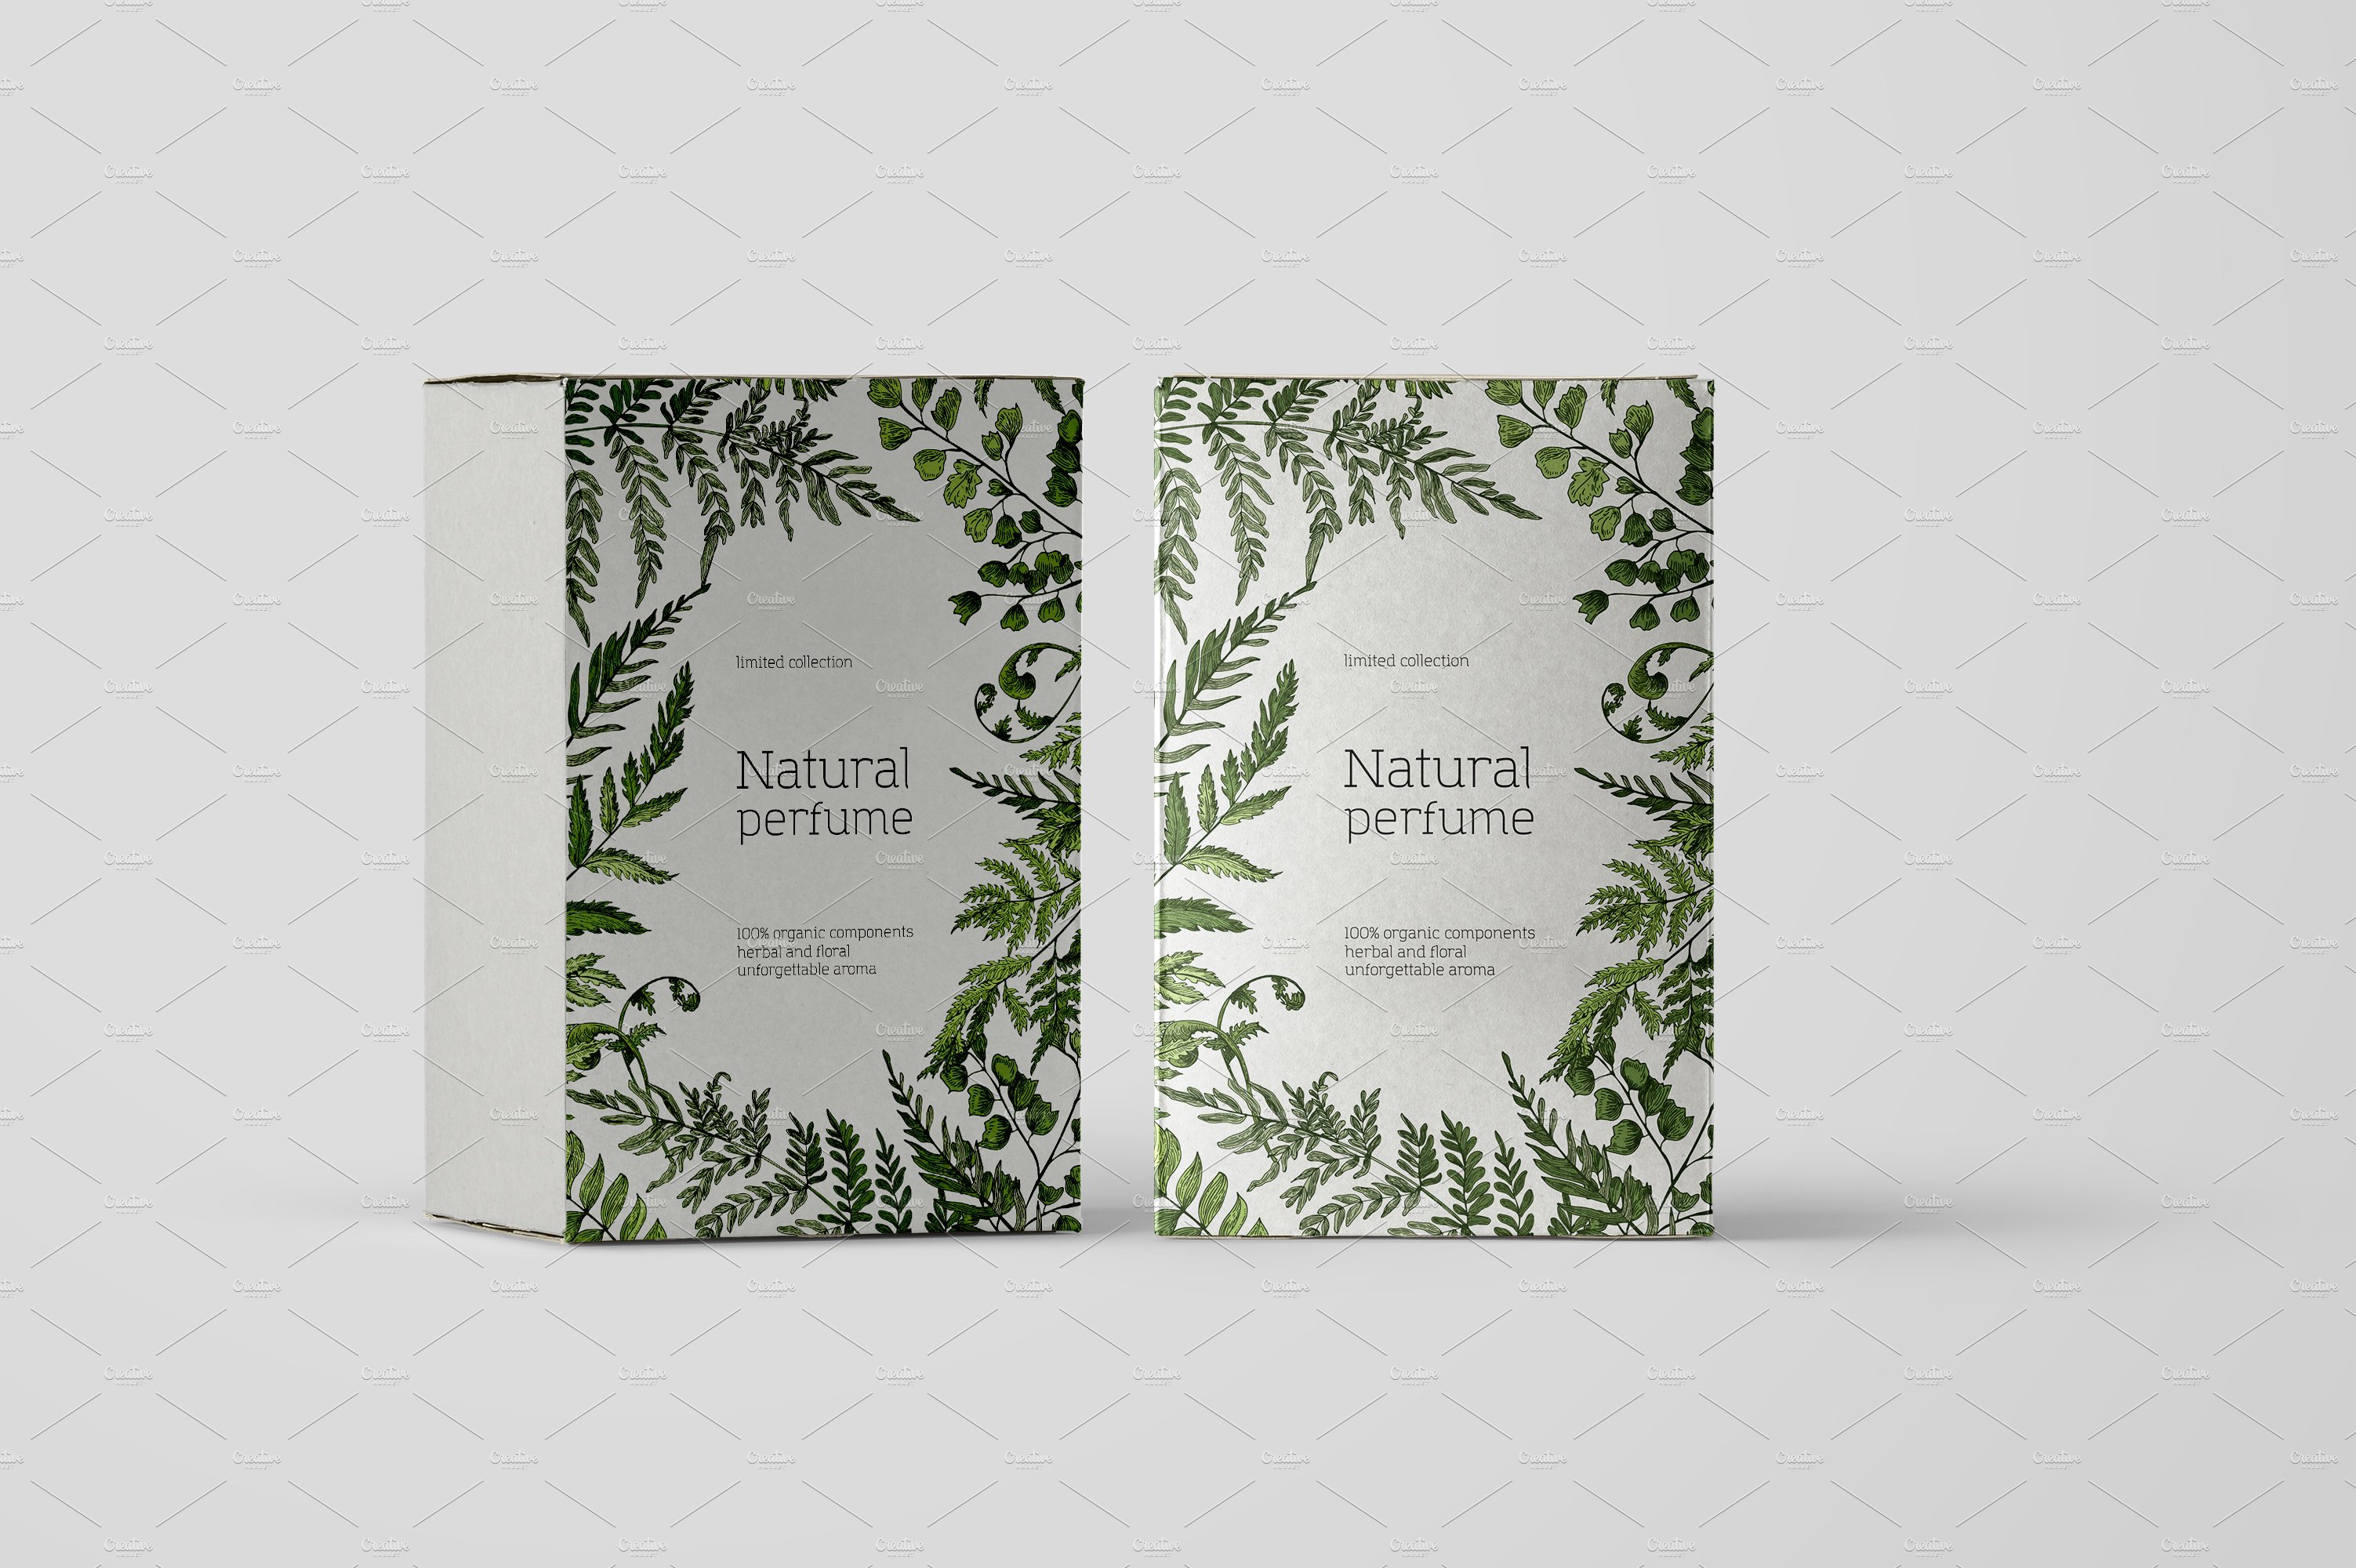 Box of natural perfume on a white background.